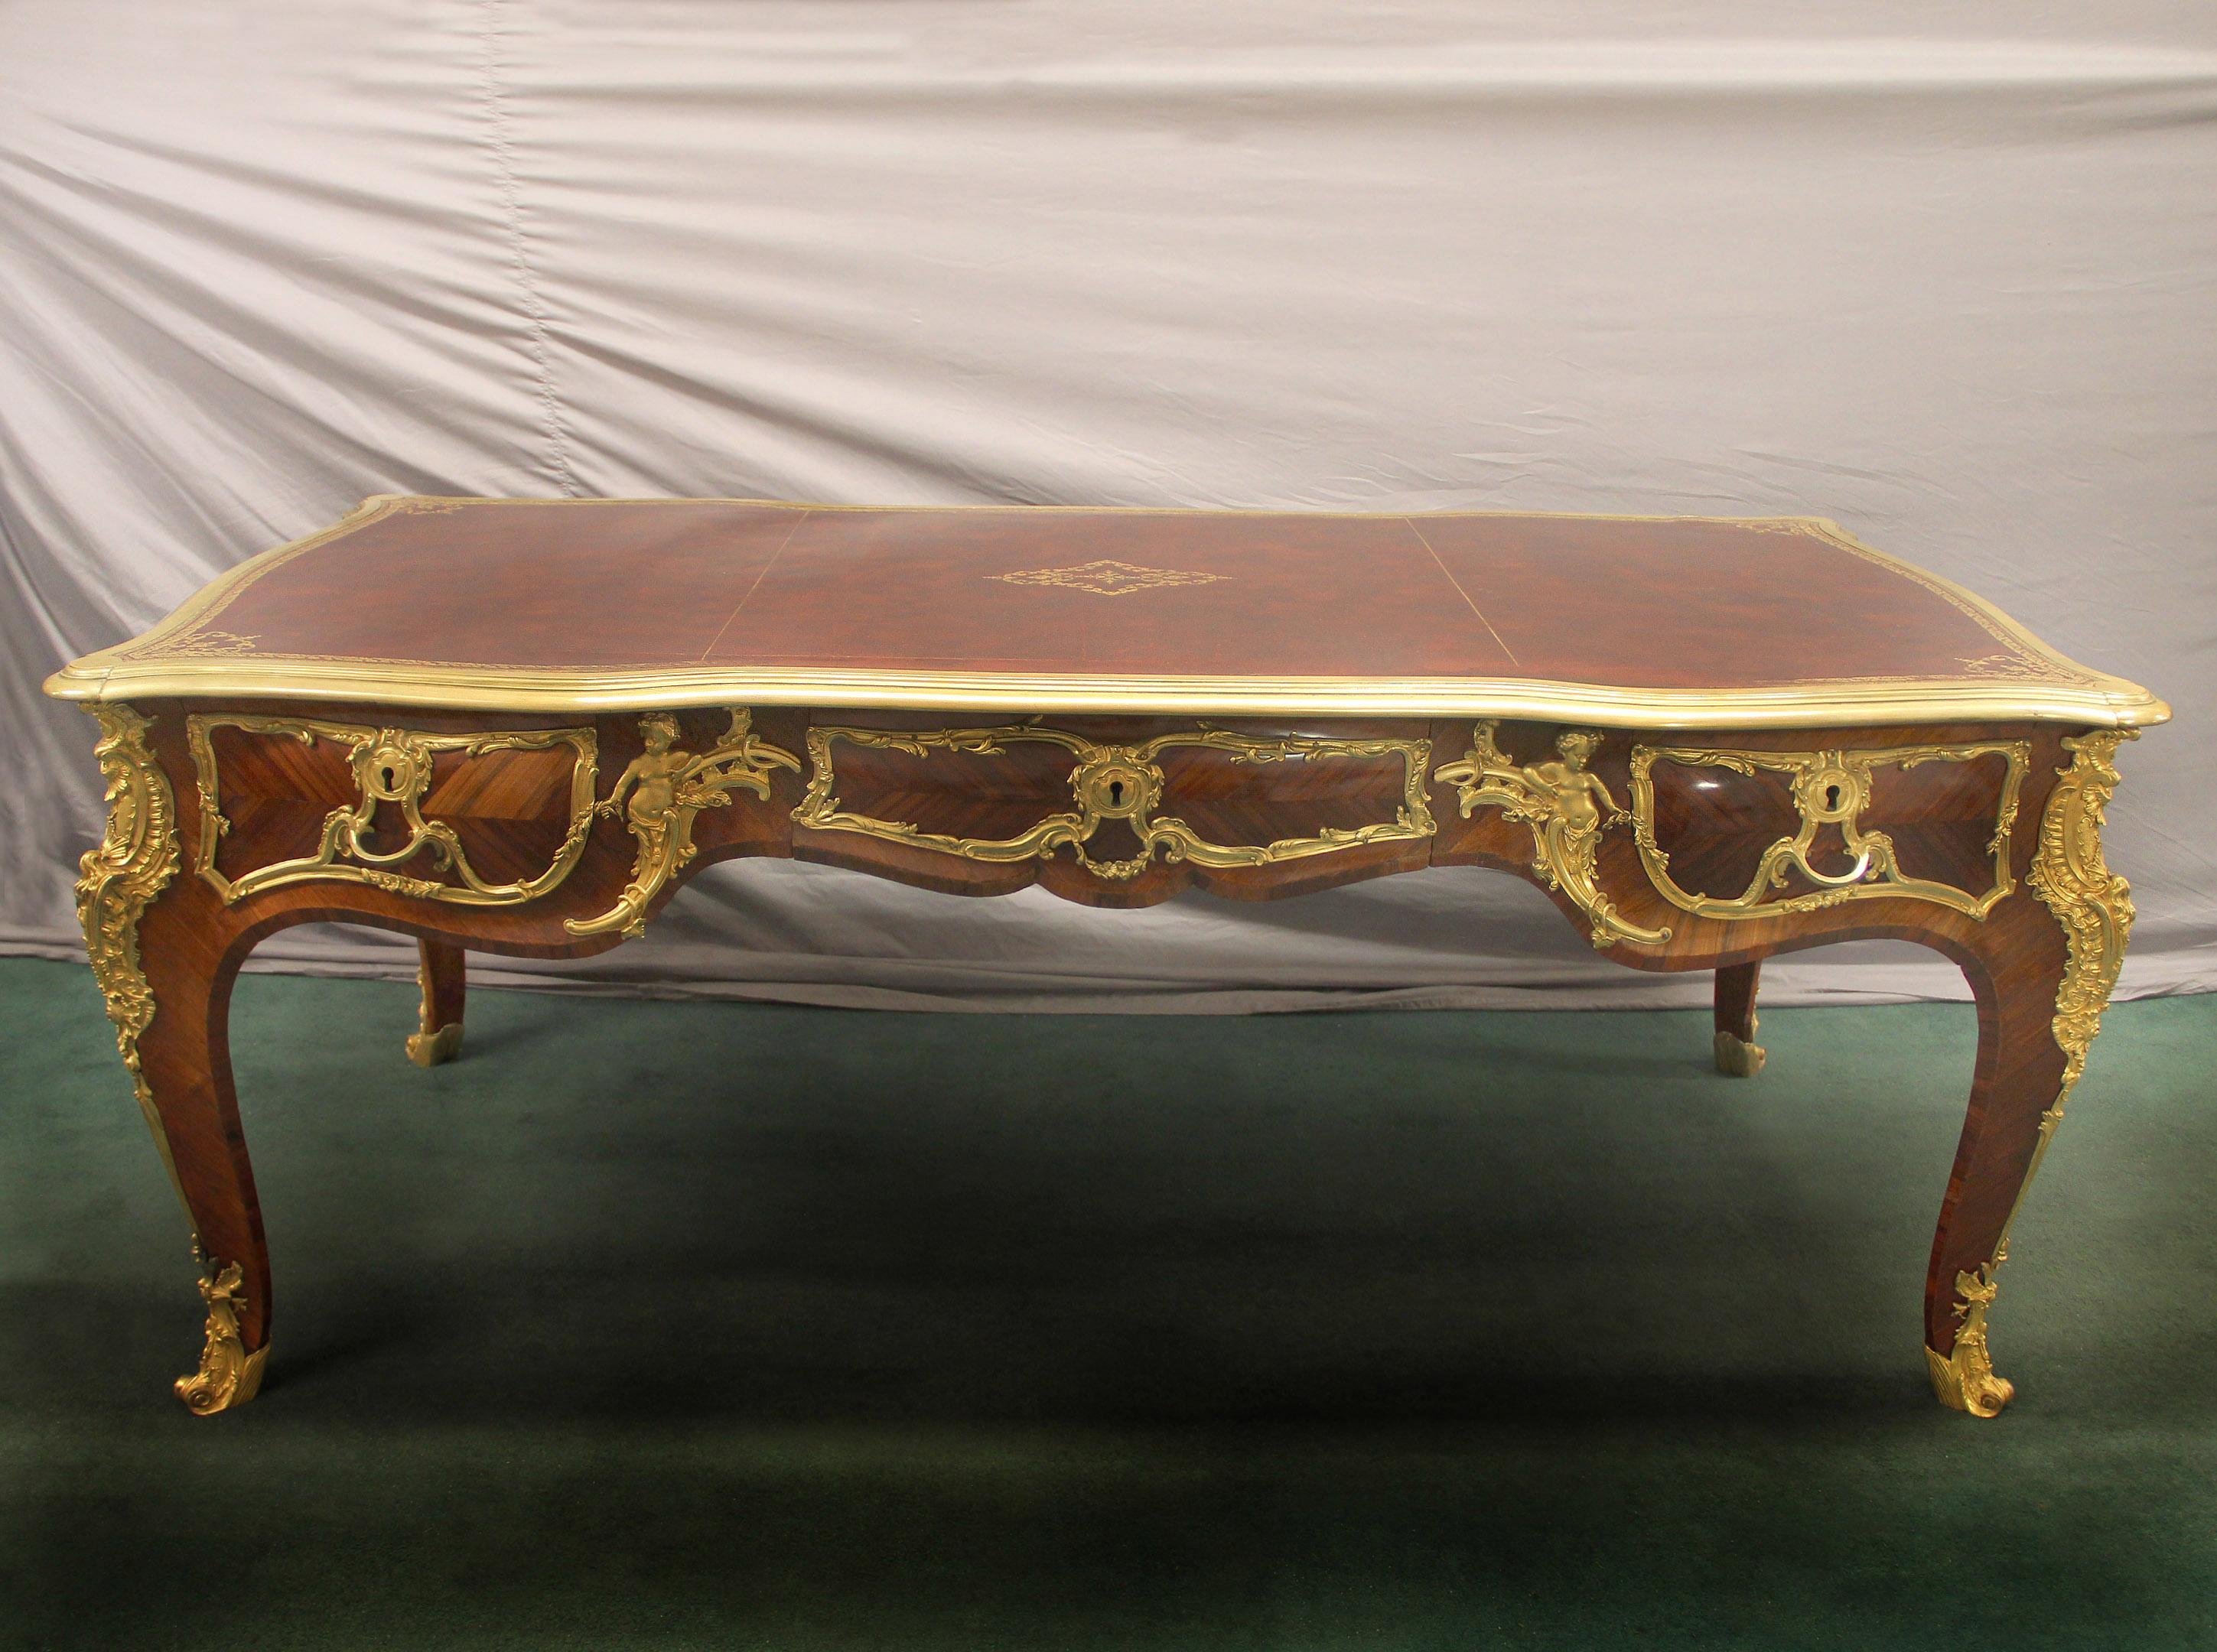 An exceptional and rare late 19th century gilt bronze mounted Louis XV Style Bureau Plat Attributed to Zwiener

Attributed to Joseph Zwiener

The serpentine case with a rectangular top with gilt-tooled leather writing-surface within a molded